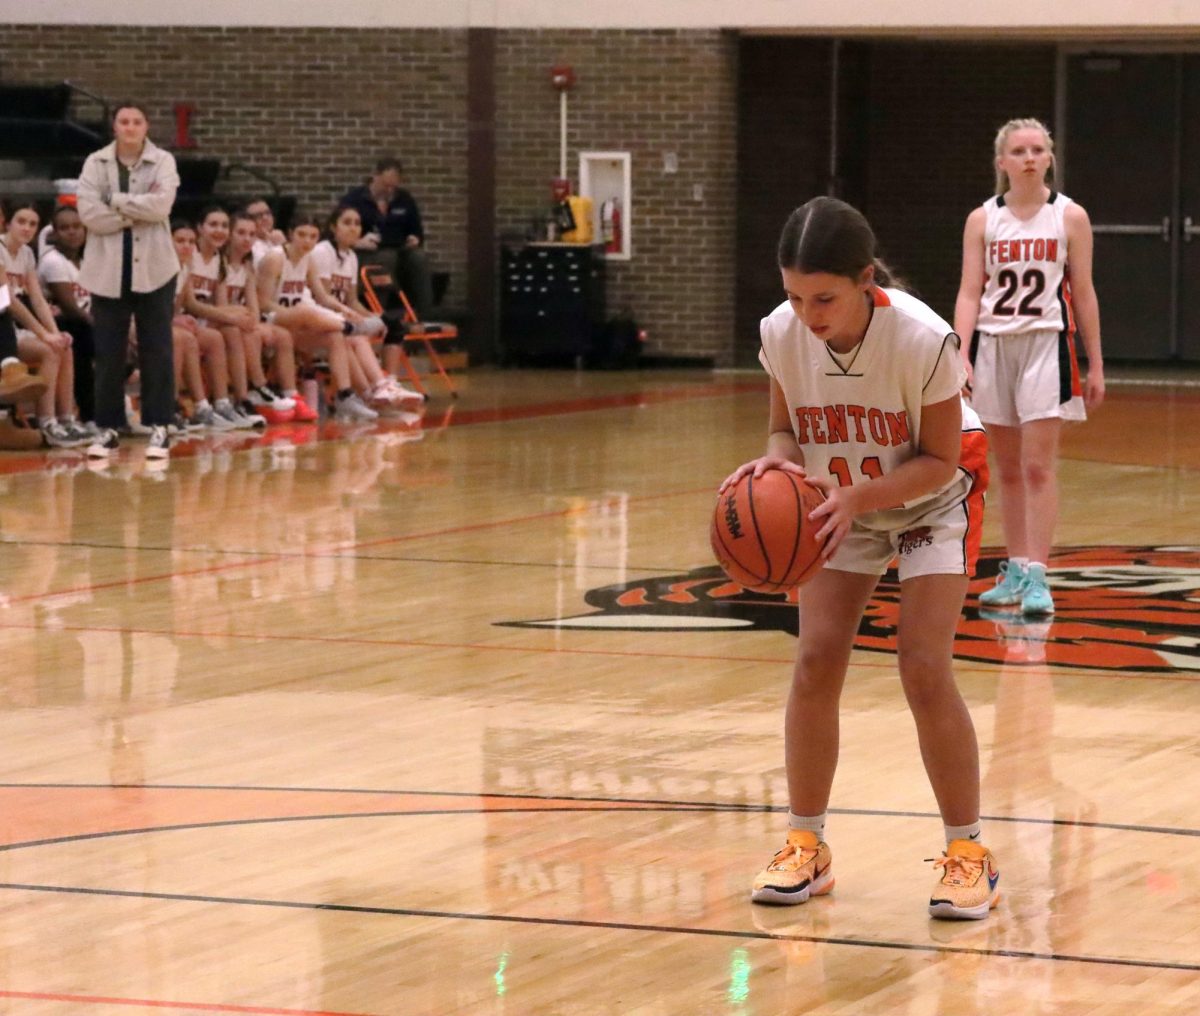 Preparing to shoot a free throw, freshman Madison Eltringham starts her routine. On Jan. 8, the JV girls basketball team faced off against the Holly Broncos and lost 24-25.